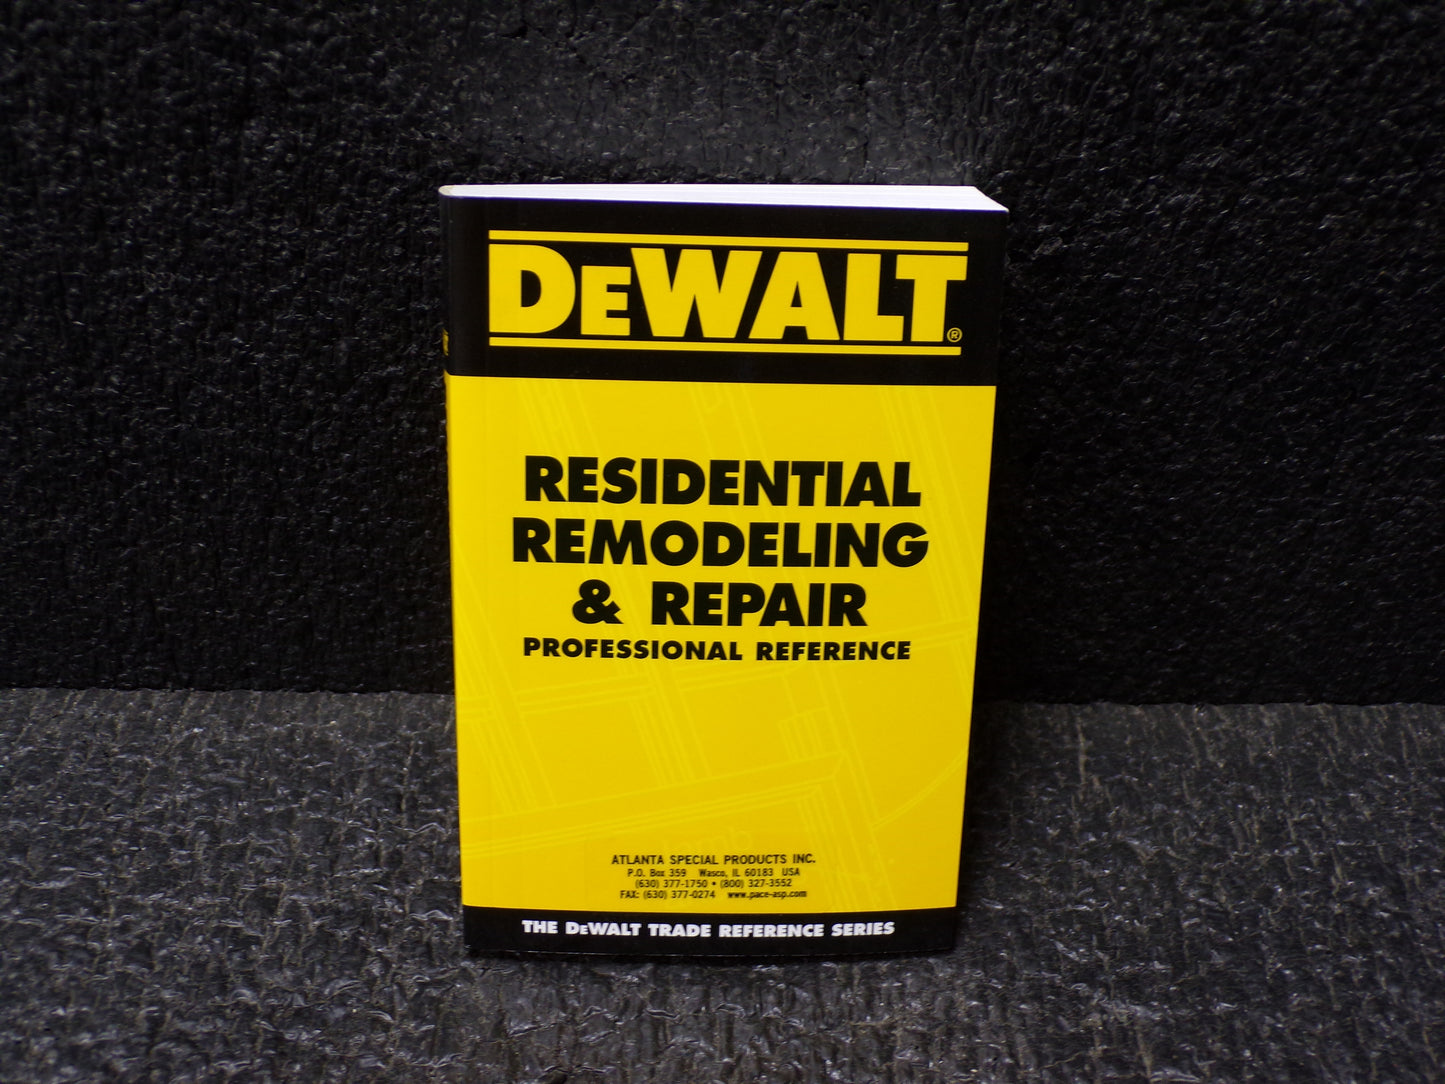 DeWalt RESIDENTIAL REMODELING AND REPAIR PROFESSIONAL REFERENCE (CR00094-BT23)